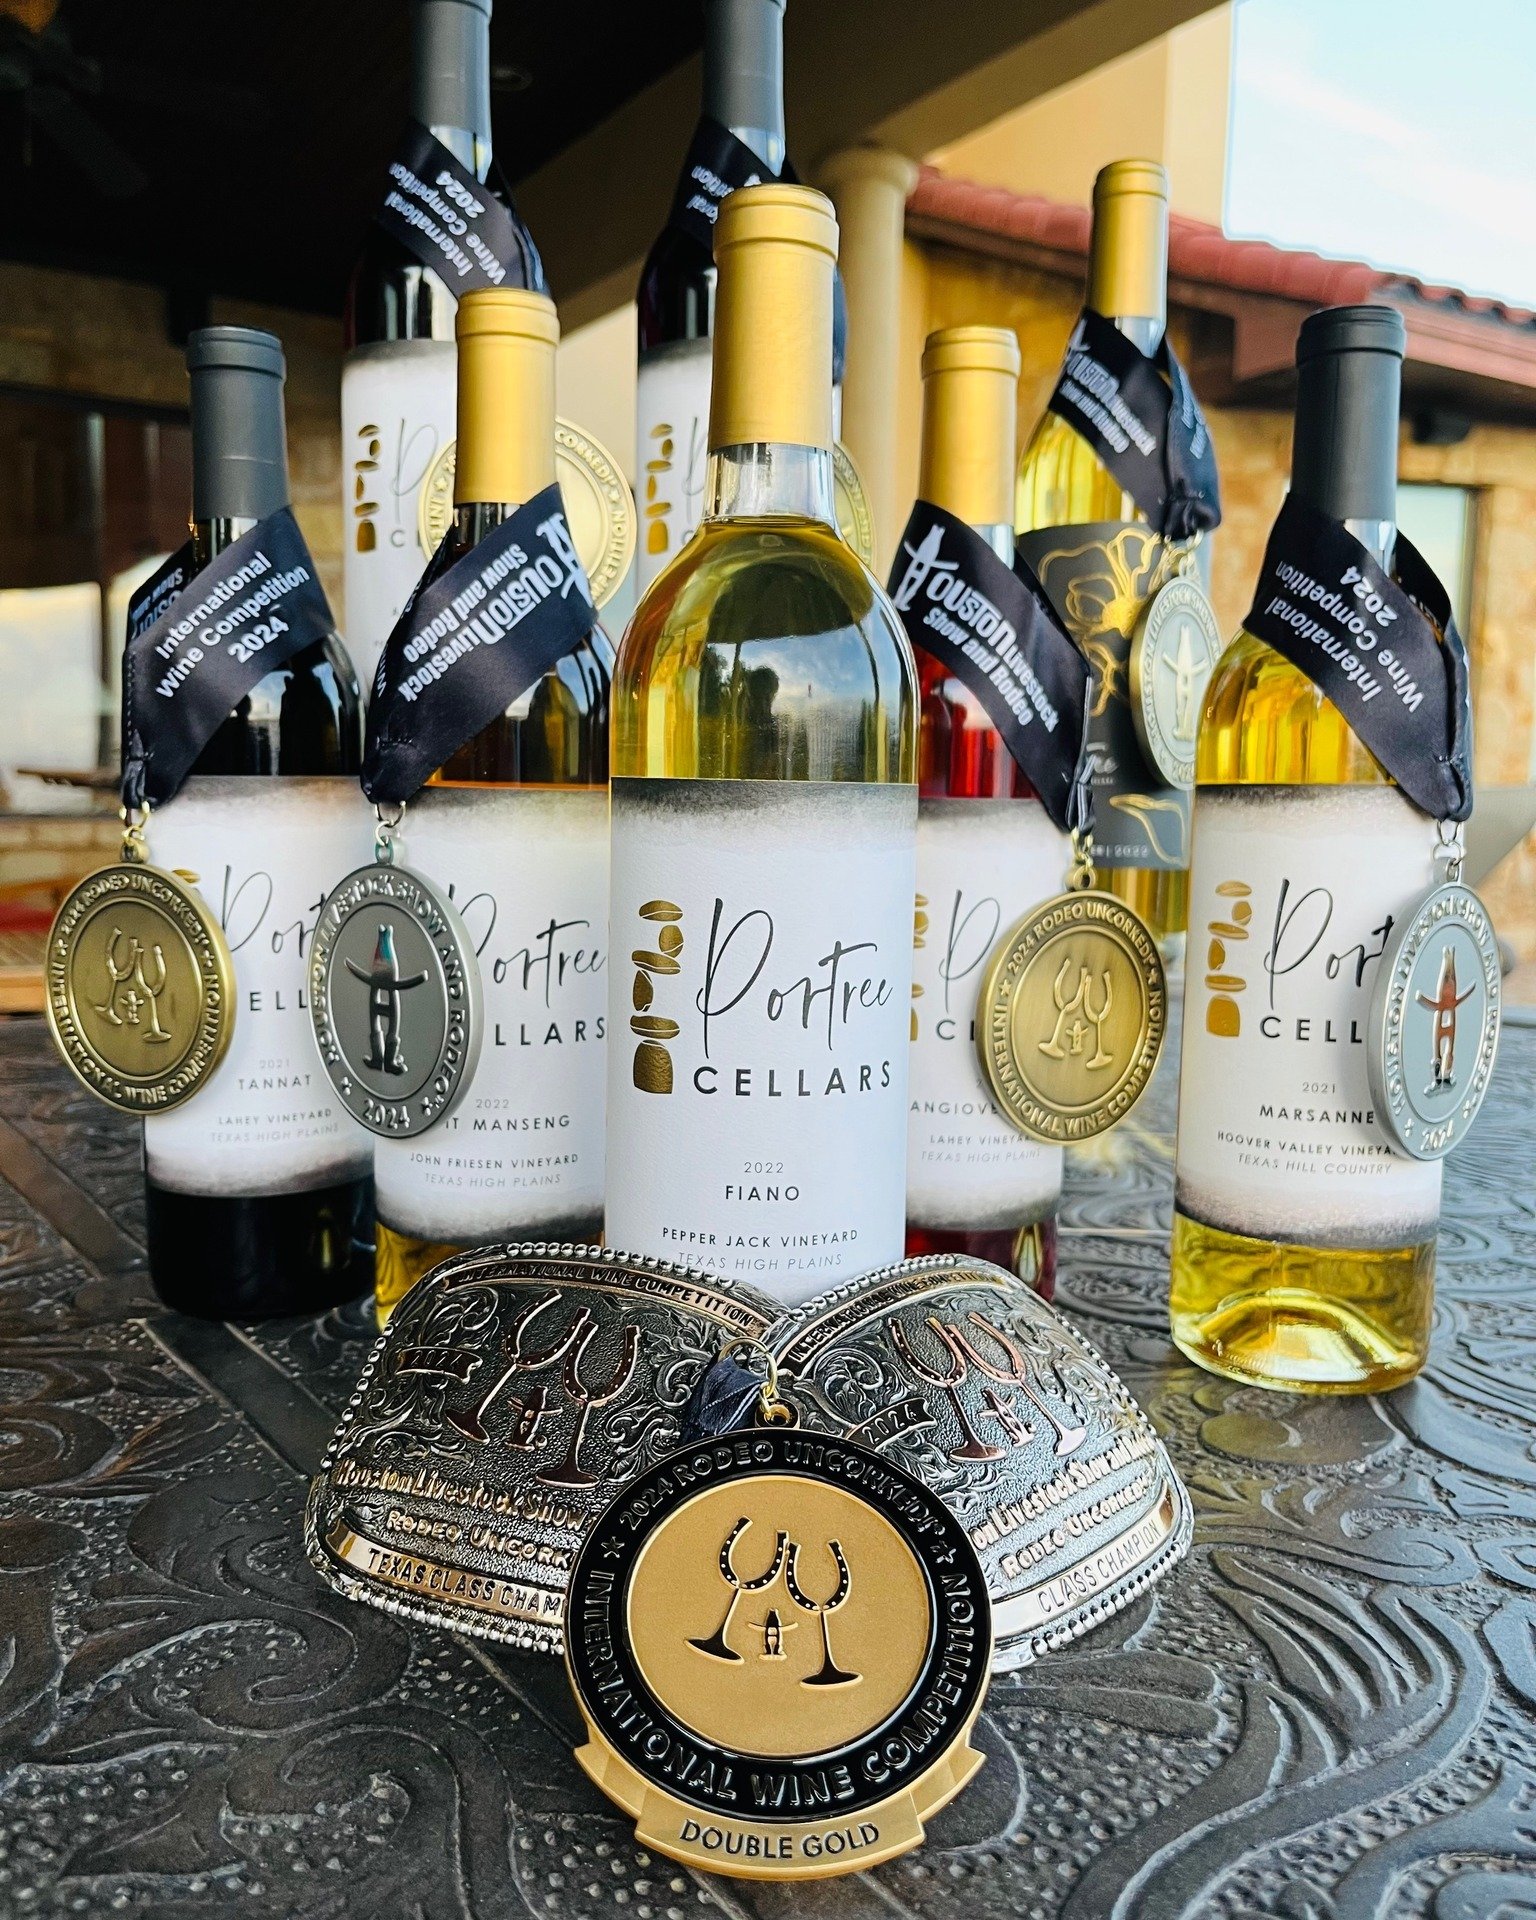 Houston Livestock Show &amp; Rodeo Wine Competition hardware finally arrived.  Come by and enjoy some of our award-winning wines!  Cheers!

#portreecellars #winecompetitions #HoustonLivestockShowandRodeo2024 #hlsr2024 #winelover #medals #winetasting